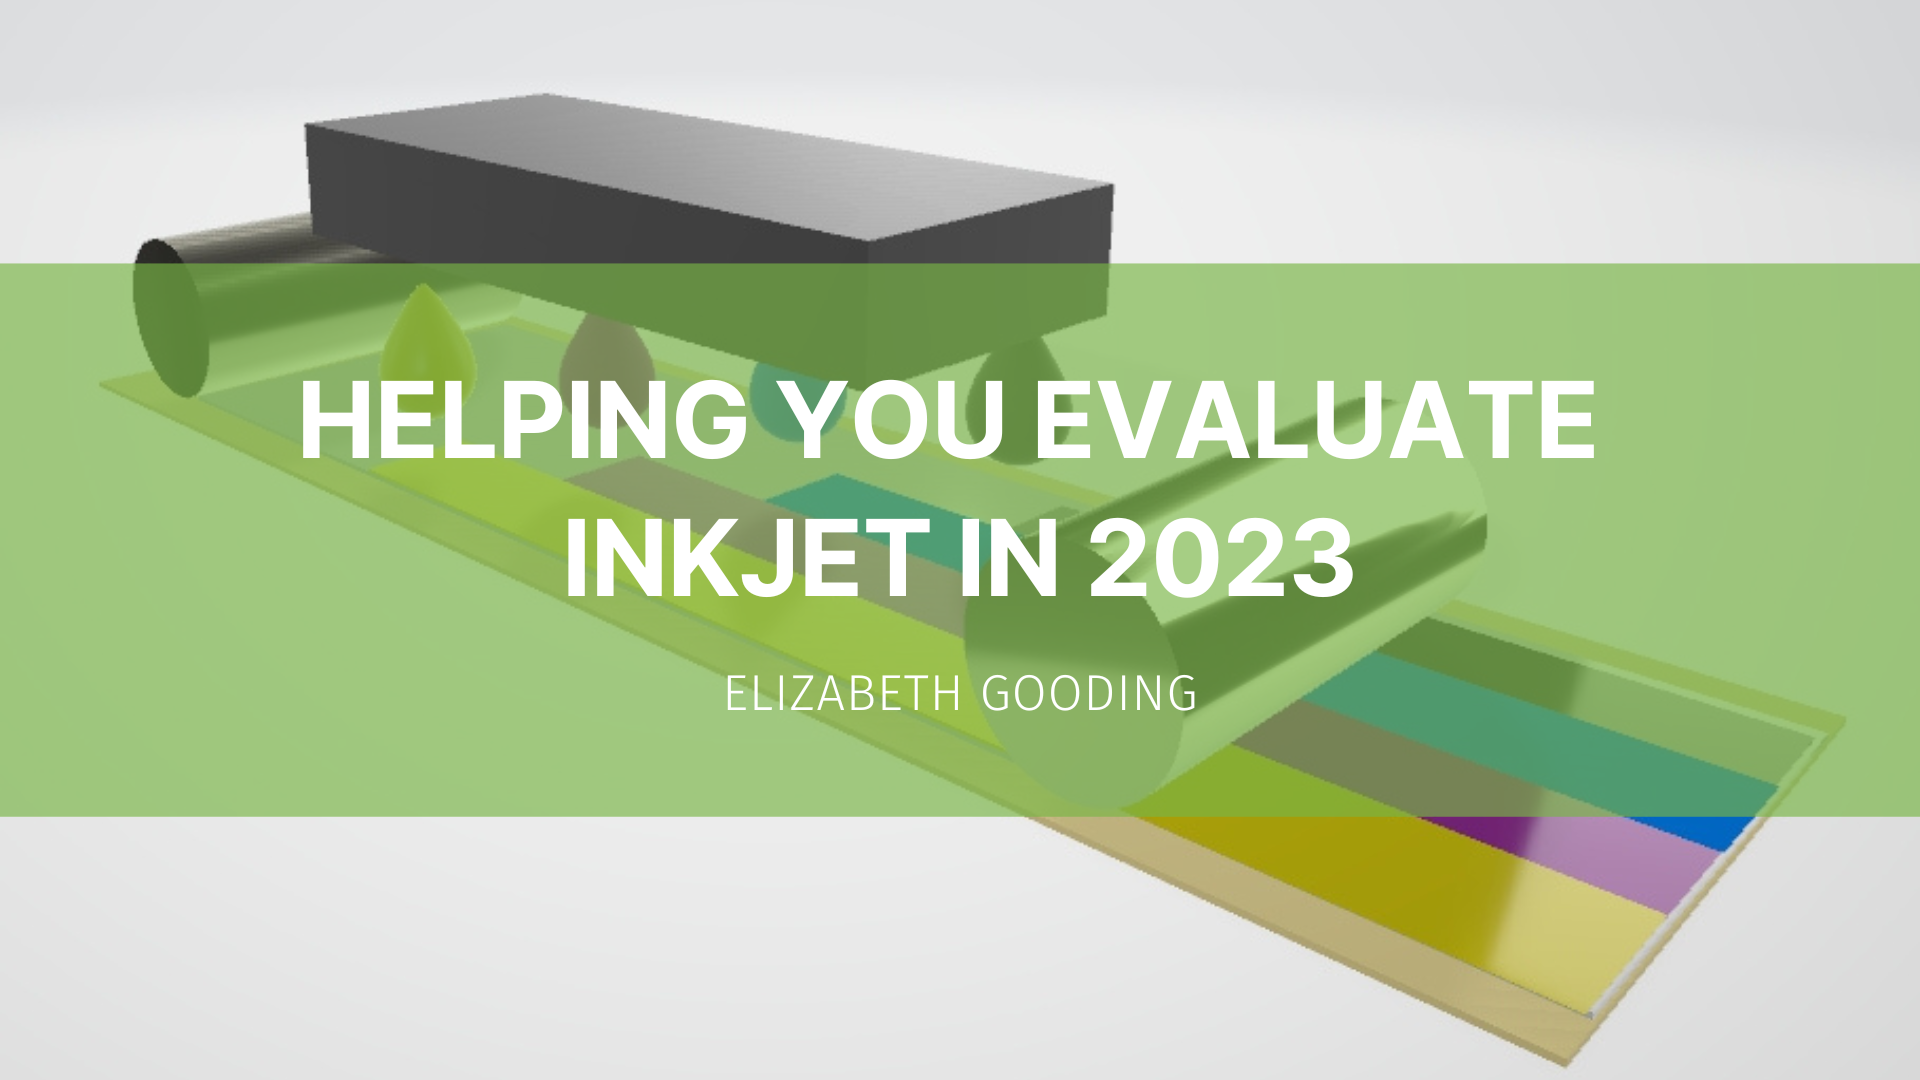 Featured image for “Helping you evaluate inkjet in 2023”